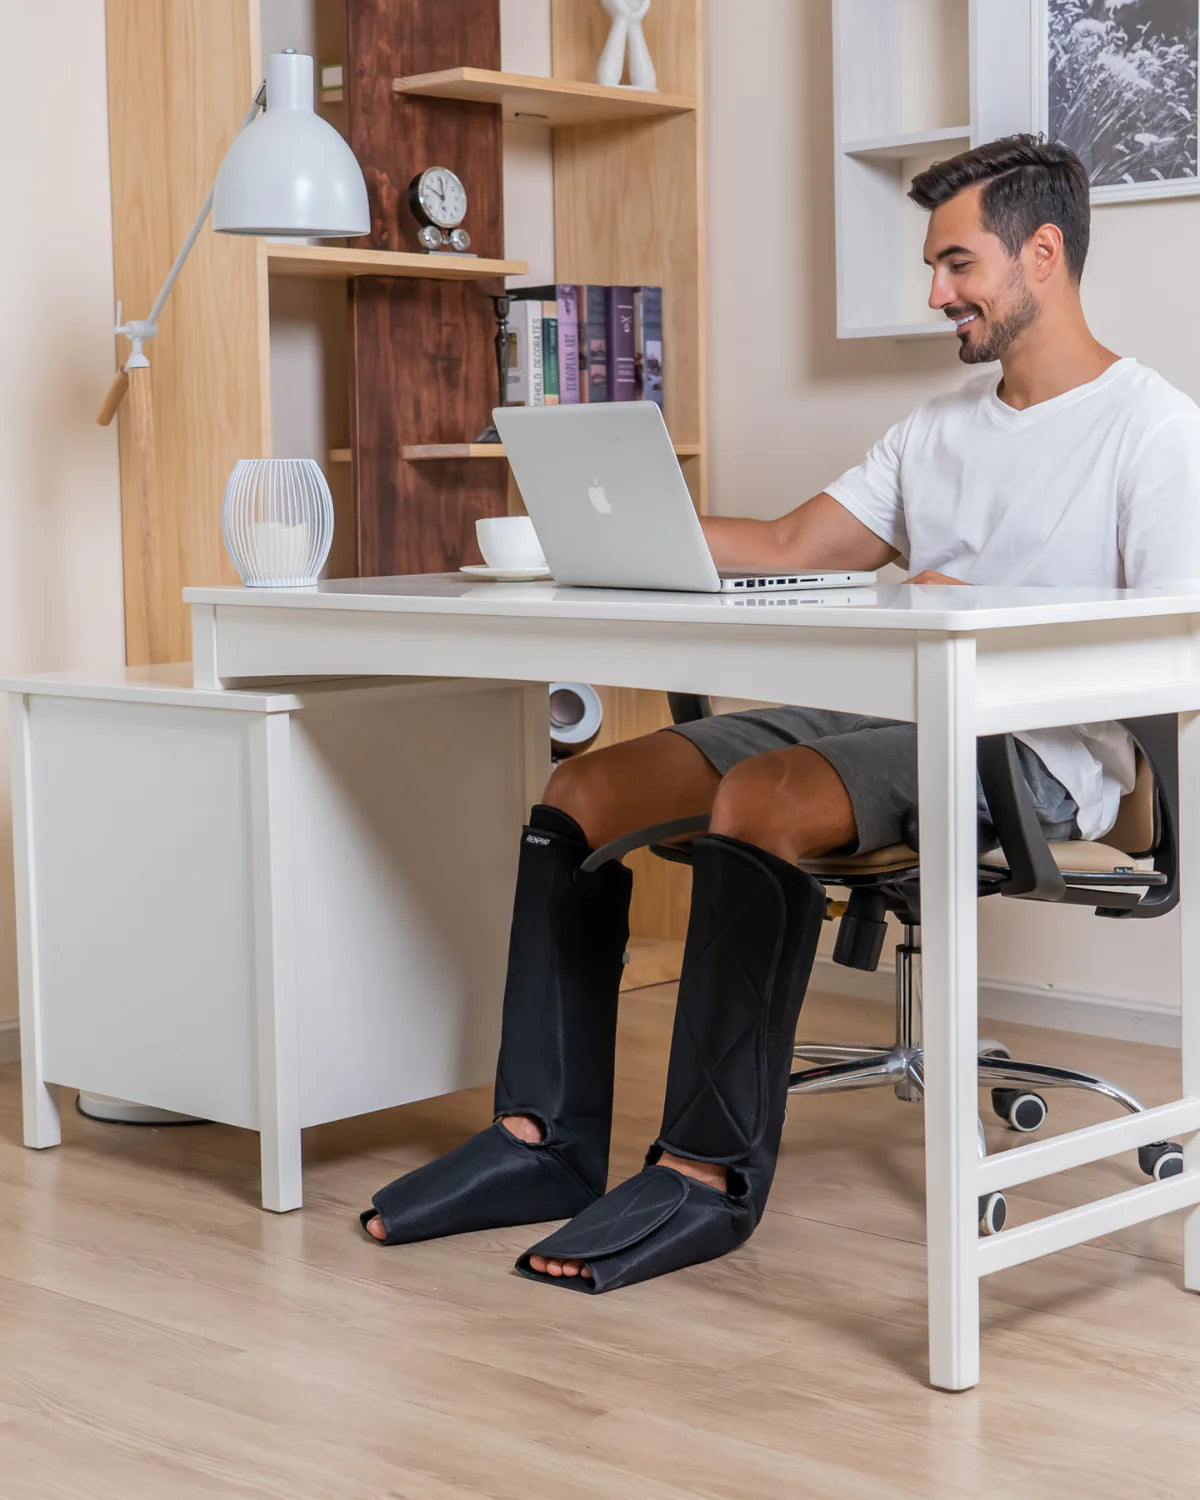 A man sits at a white desk on an office chair, using a laptop. He is wearing a white T-shirt and gray shorts. His legs are covered with Renpho EU Aeria Ultimate 2 Full Leg Massagers, extending from his feet to above his knees. The workspace includes shelves, books, a clock, and a lamp in the background.